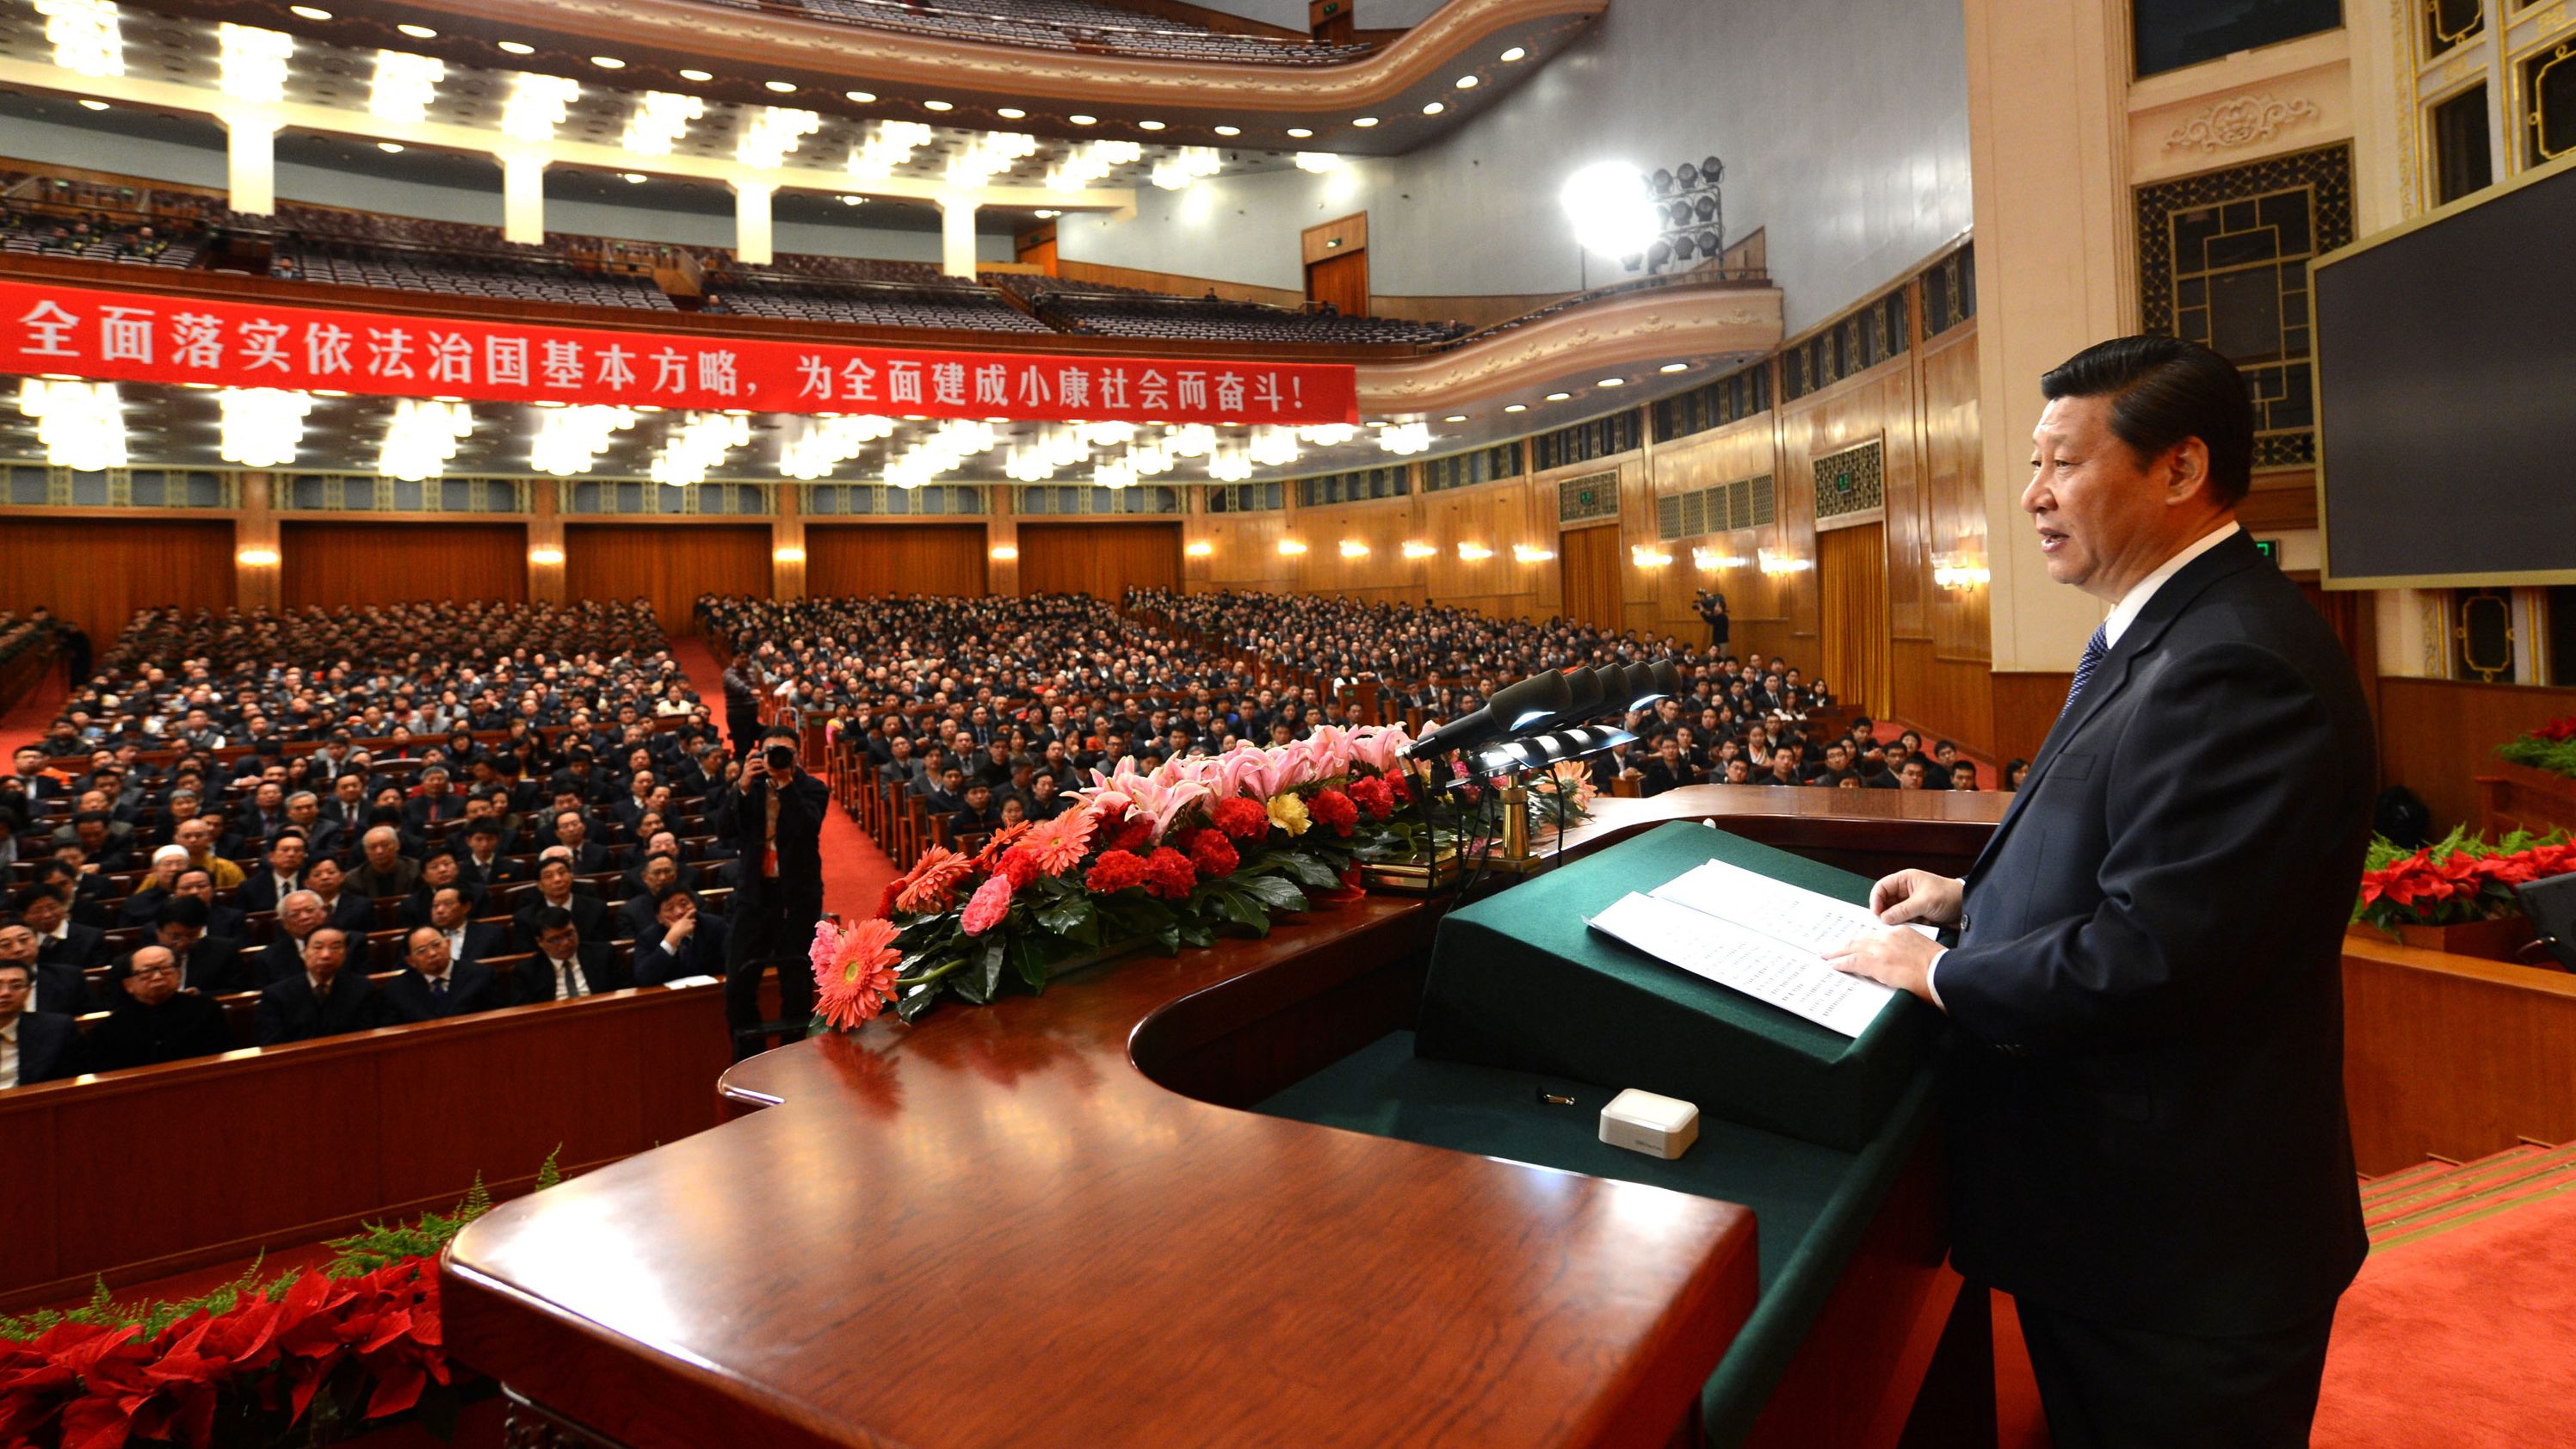 Xi Jinping, seen here in December 2012, succeeded Hu Jintao as general secretary of China's Communist Party in 2012. The National People's Congress elected him president in March 2013.